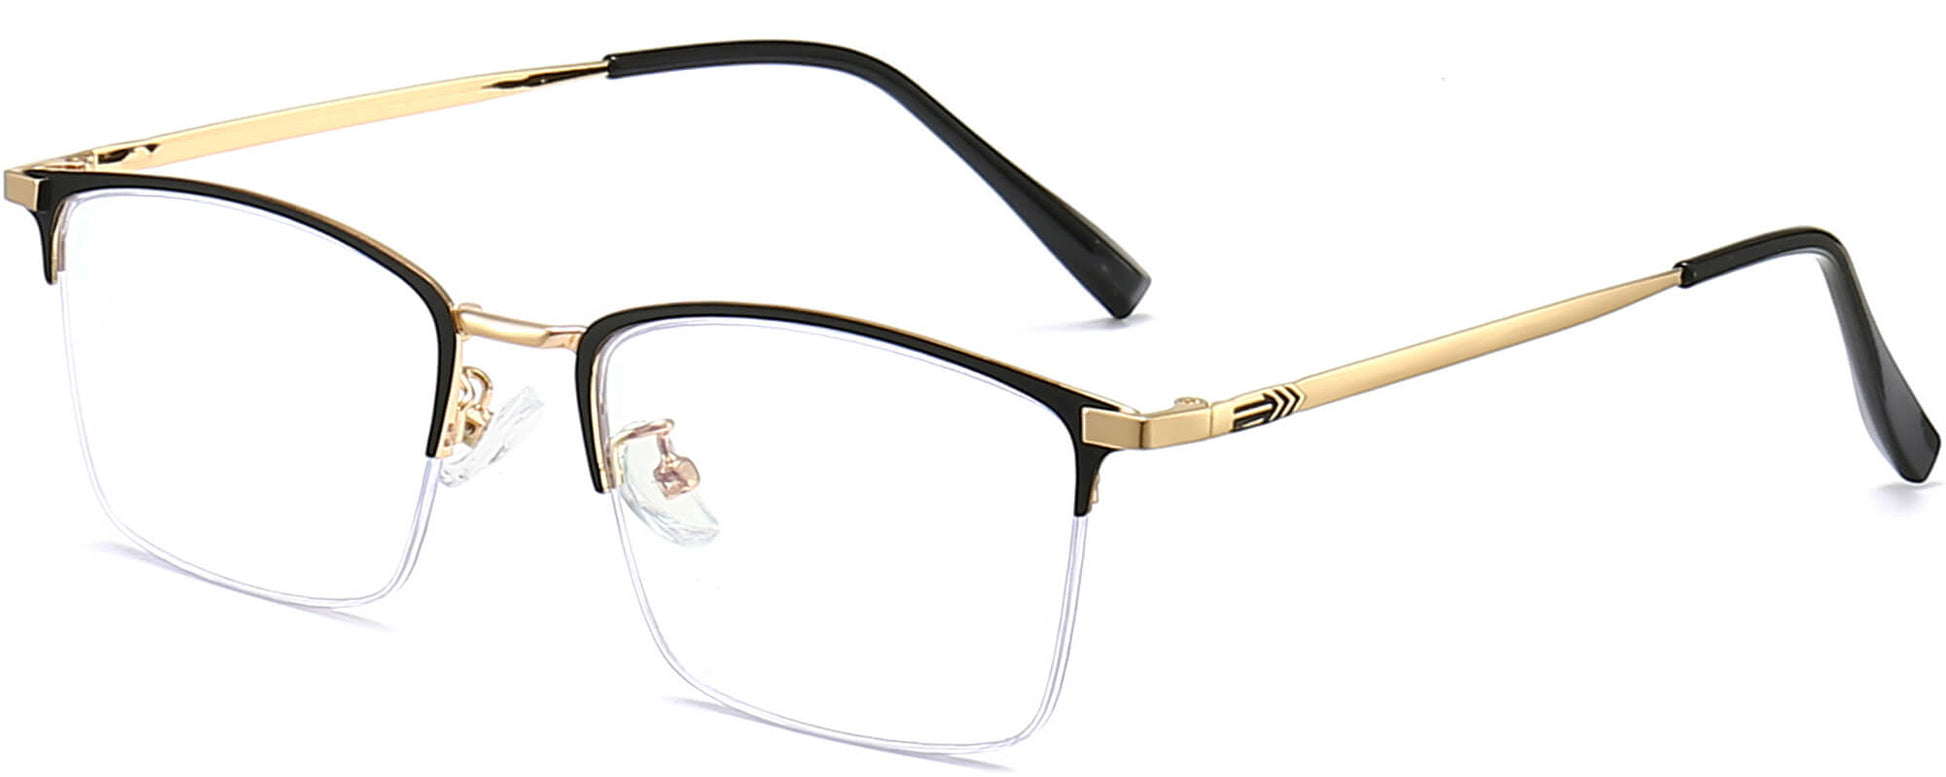 Reign Square Black Eyeglasses from ANRRI, angle view